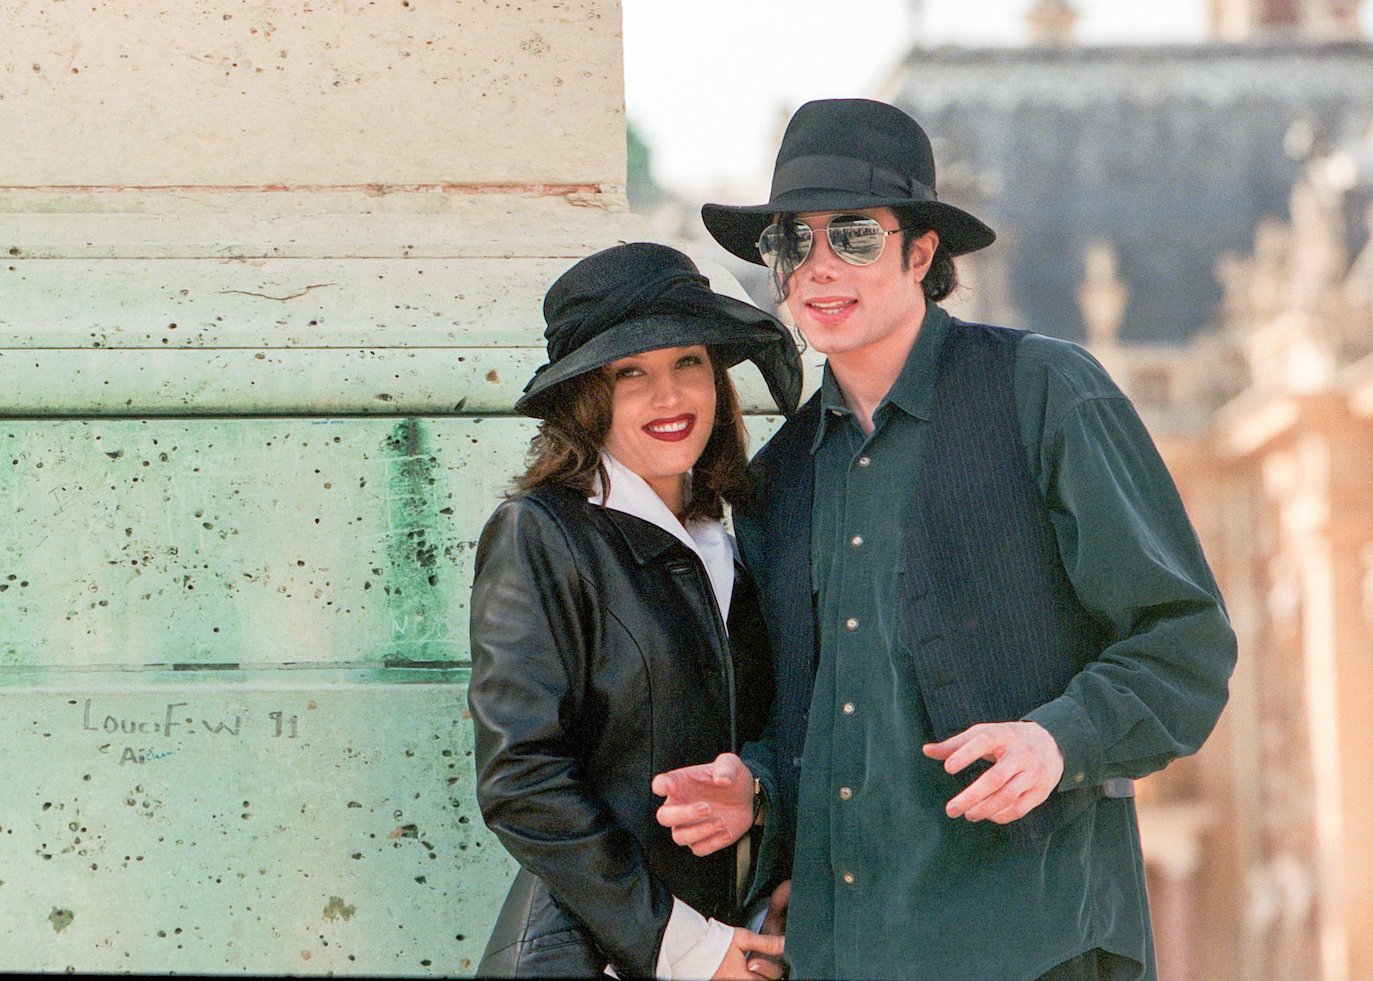 Lisa Marie Presley and Michael Jackson pose at the Chateau de Versailles. Lisa Marie Presley was married to Michael Jackson for 20 months.